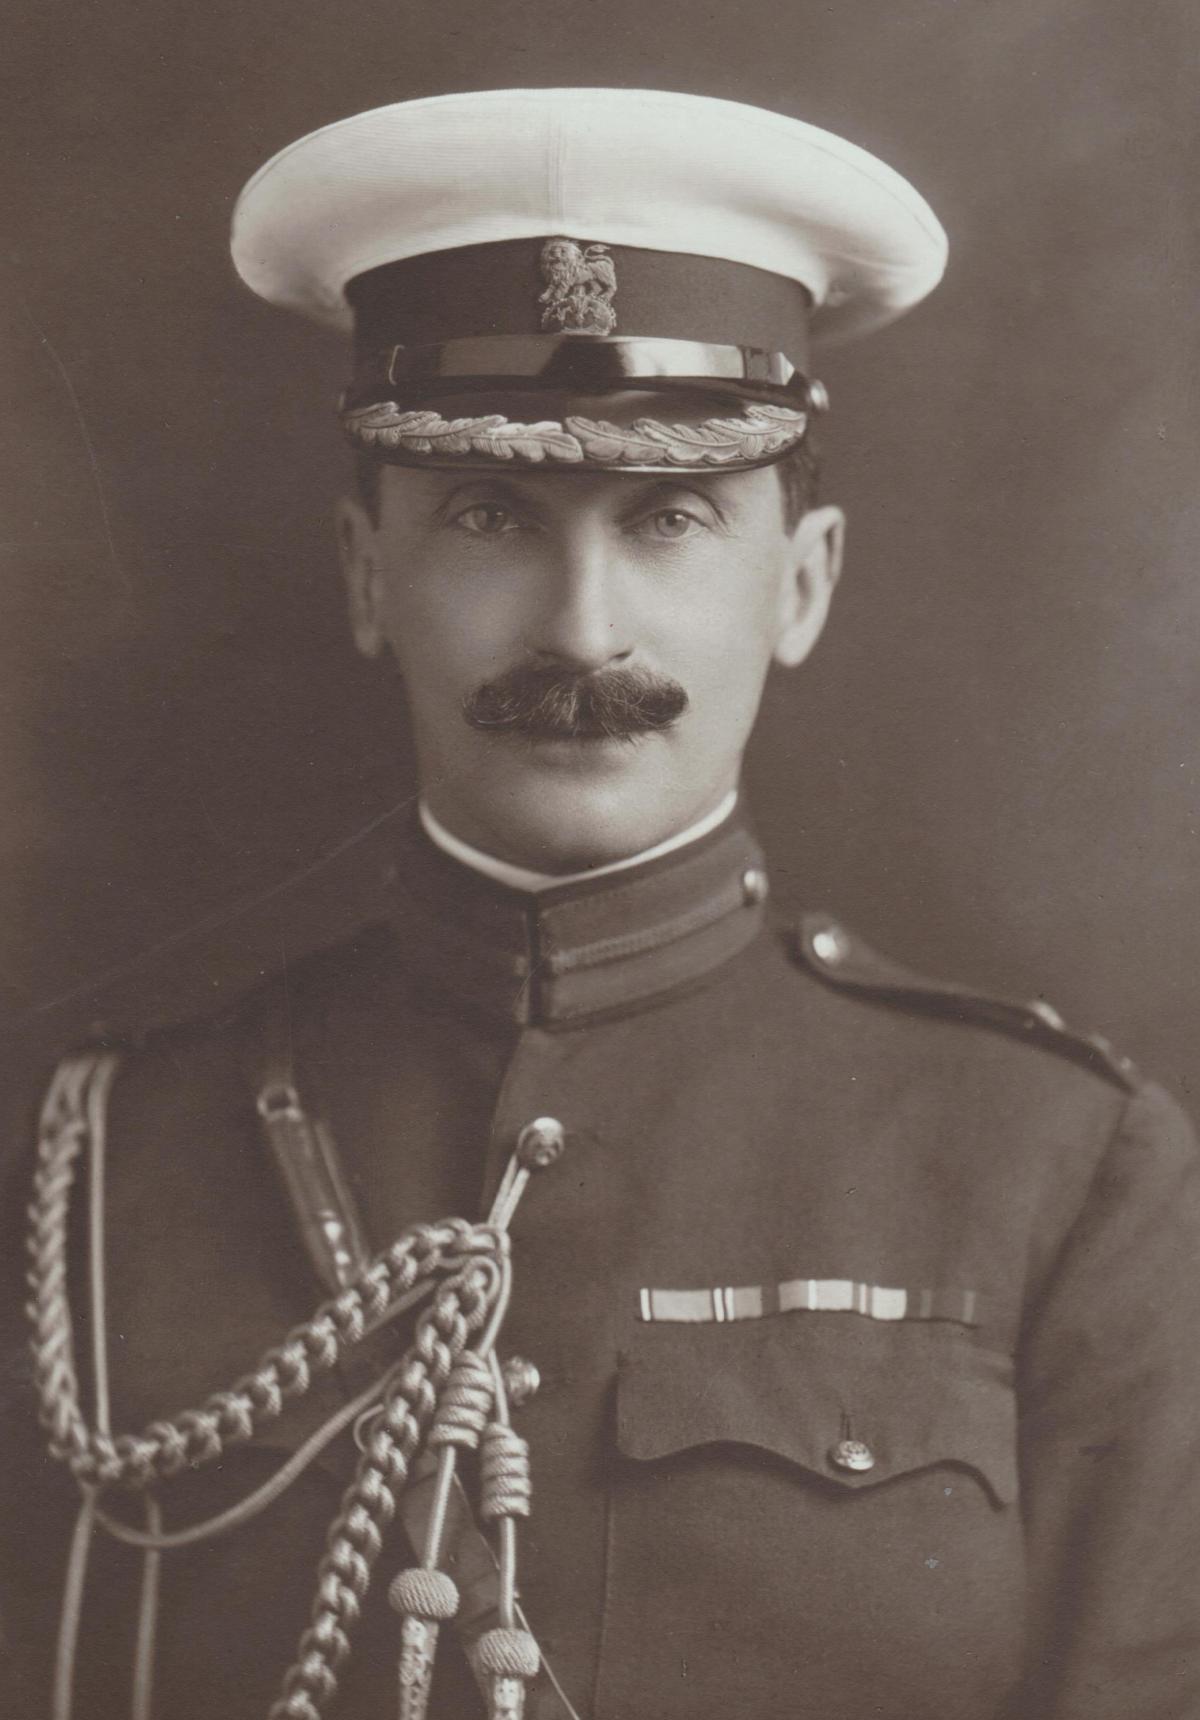 Lord Charles Mercer Nairne - a Major in the 1st King’s Royal Dragoon Guards - was killed in action at Ypres on 29 October 1914, just three months after the outbreak of war. 